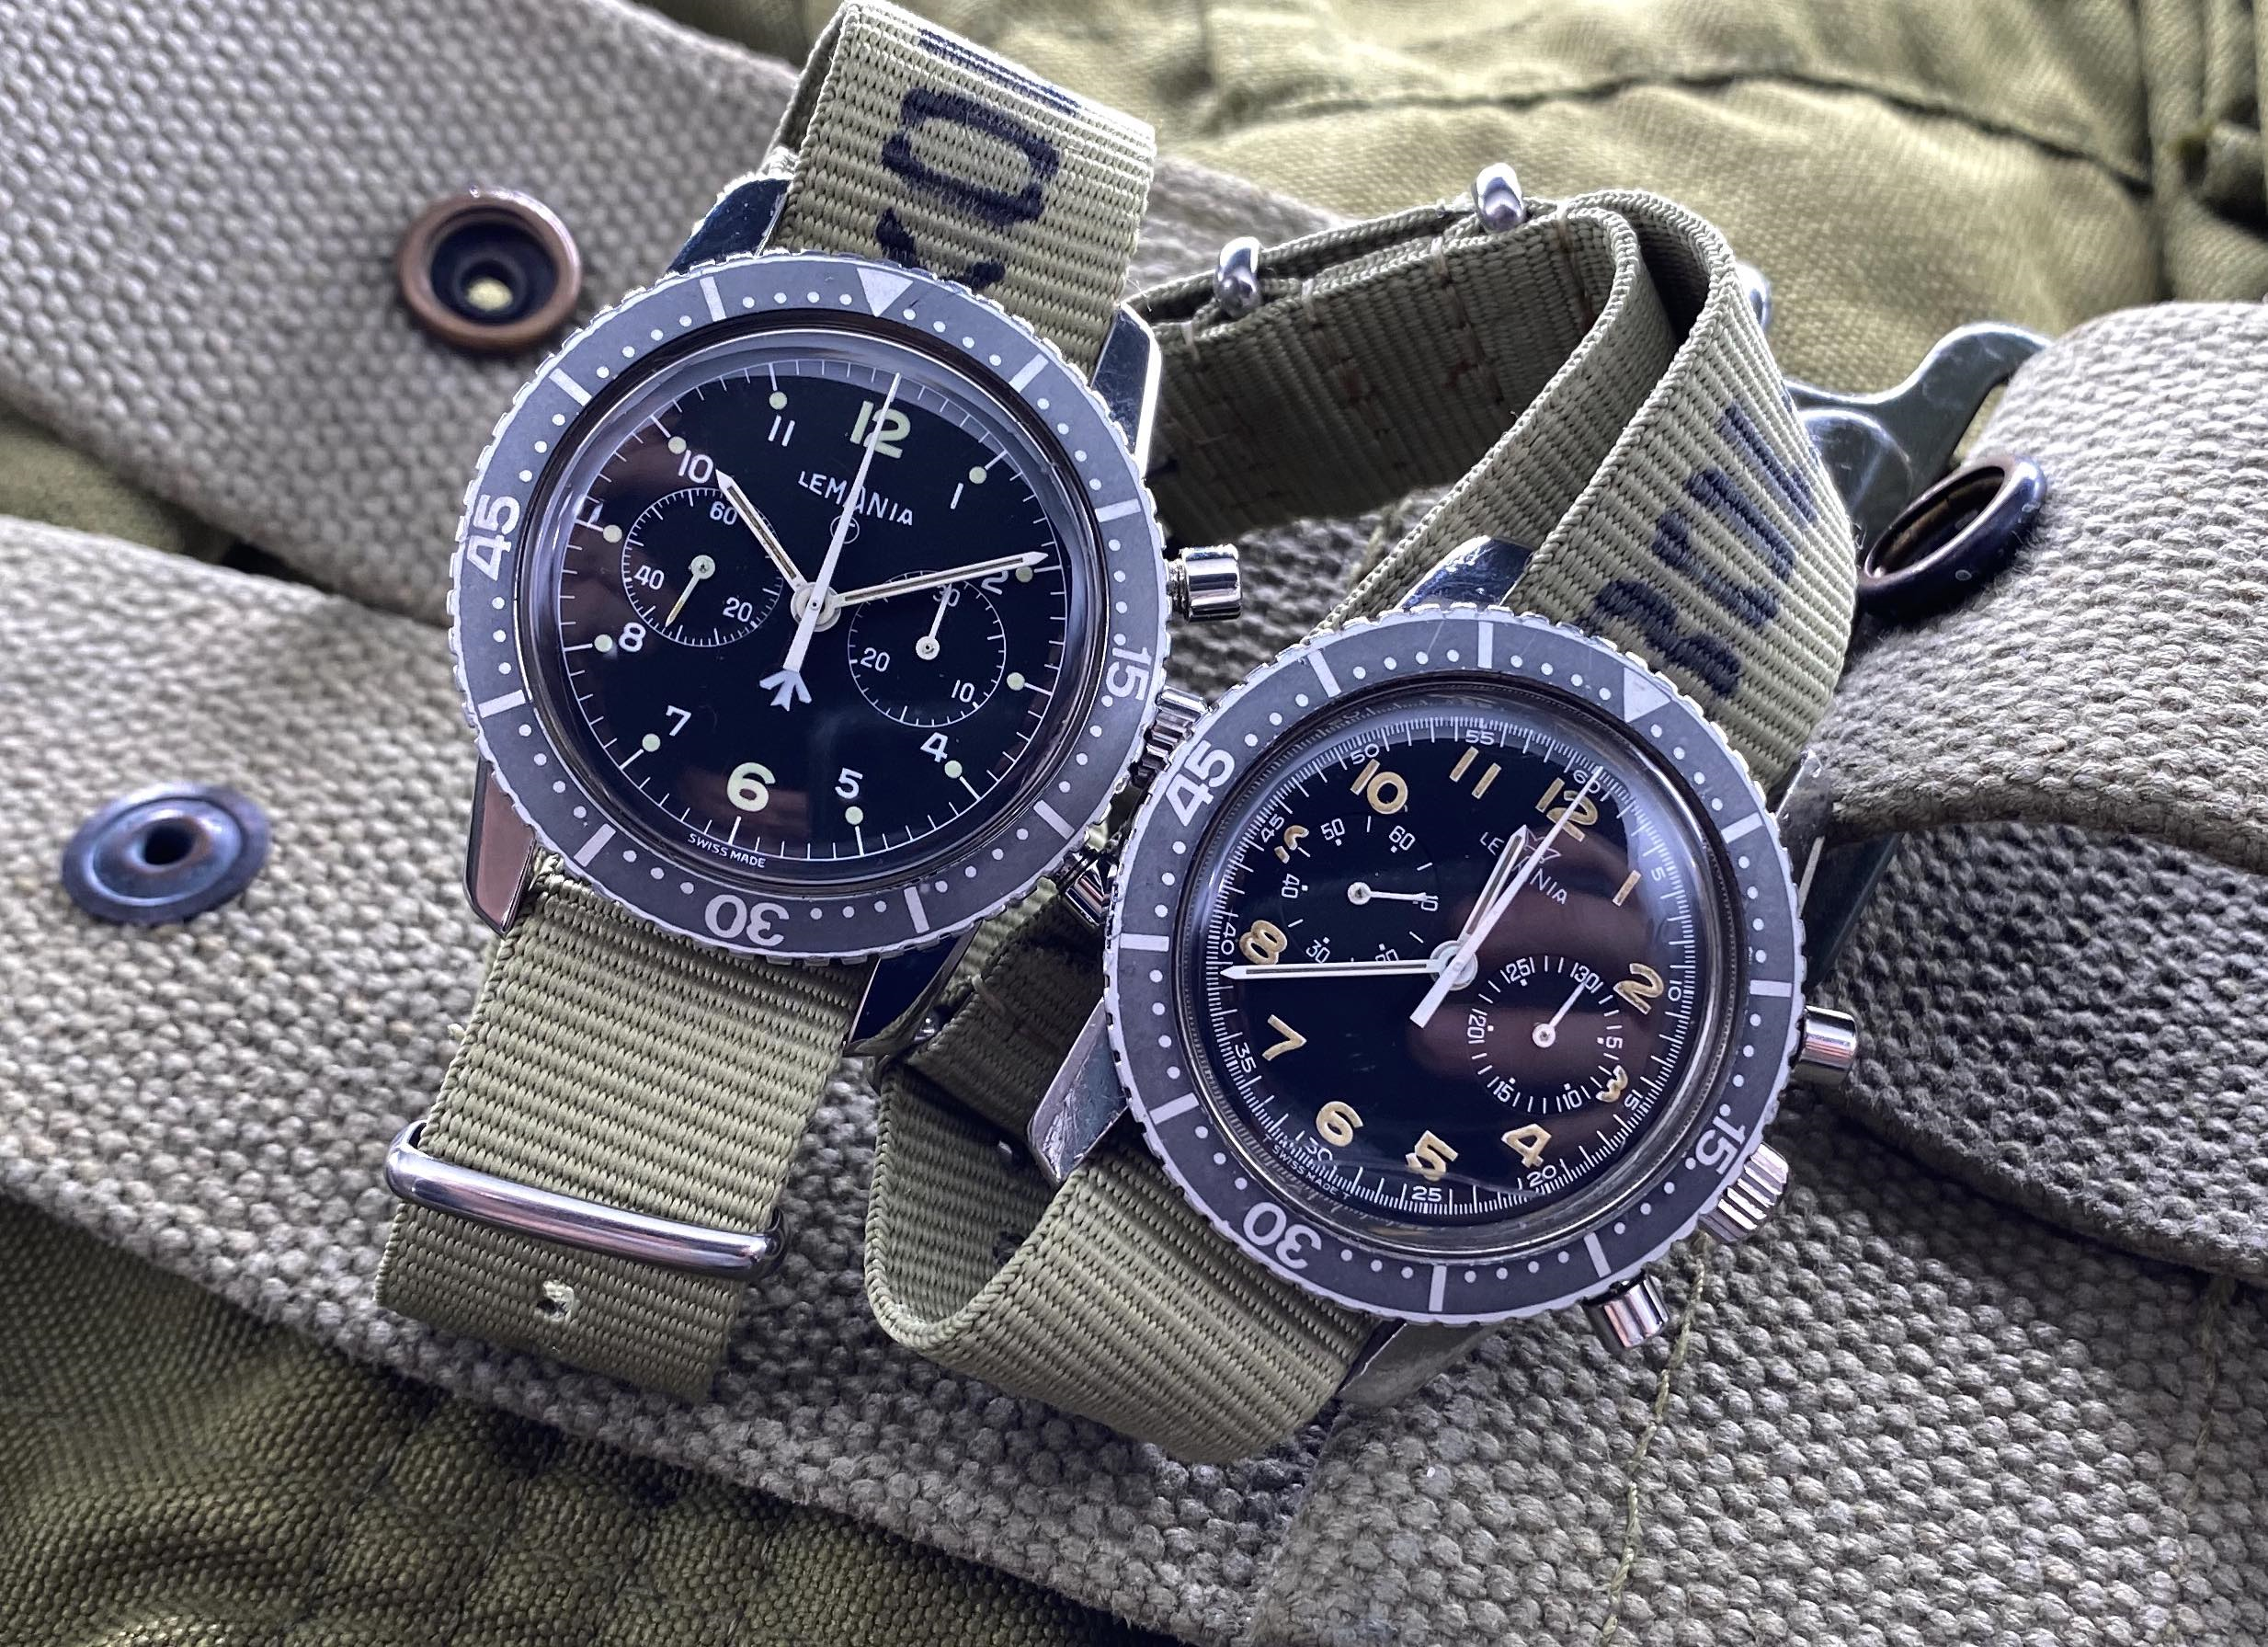 1970's South African Airforce issued Watches.